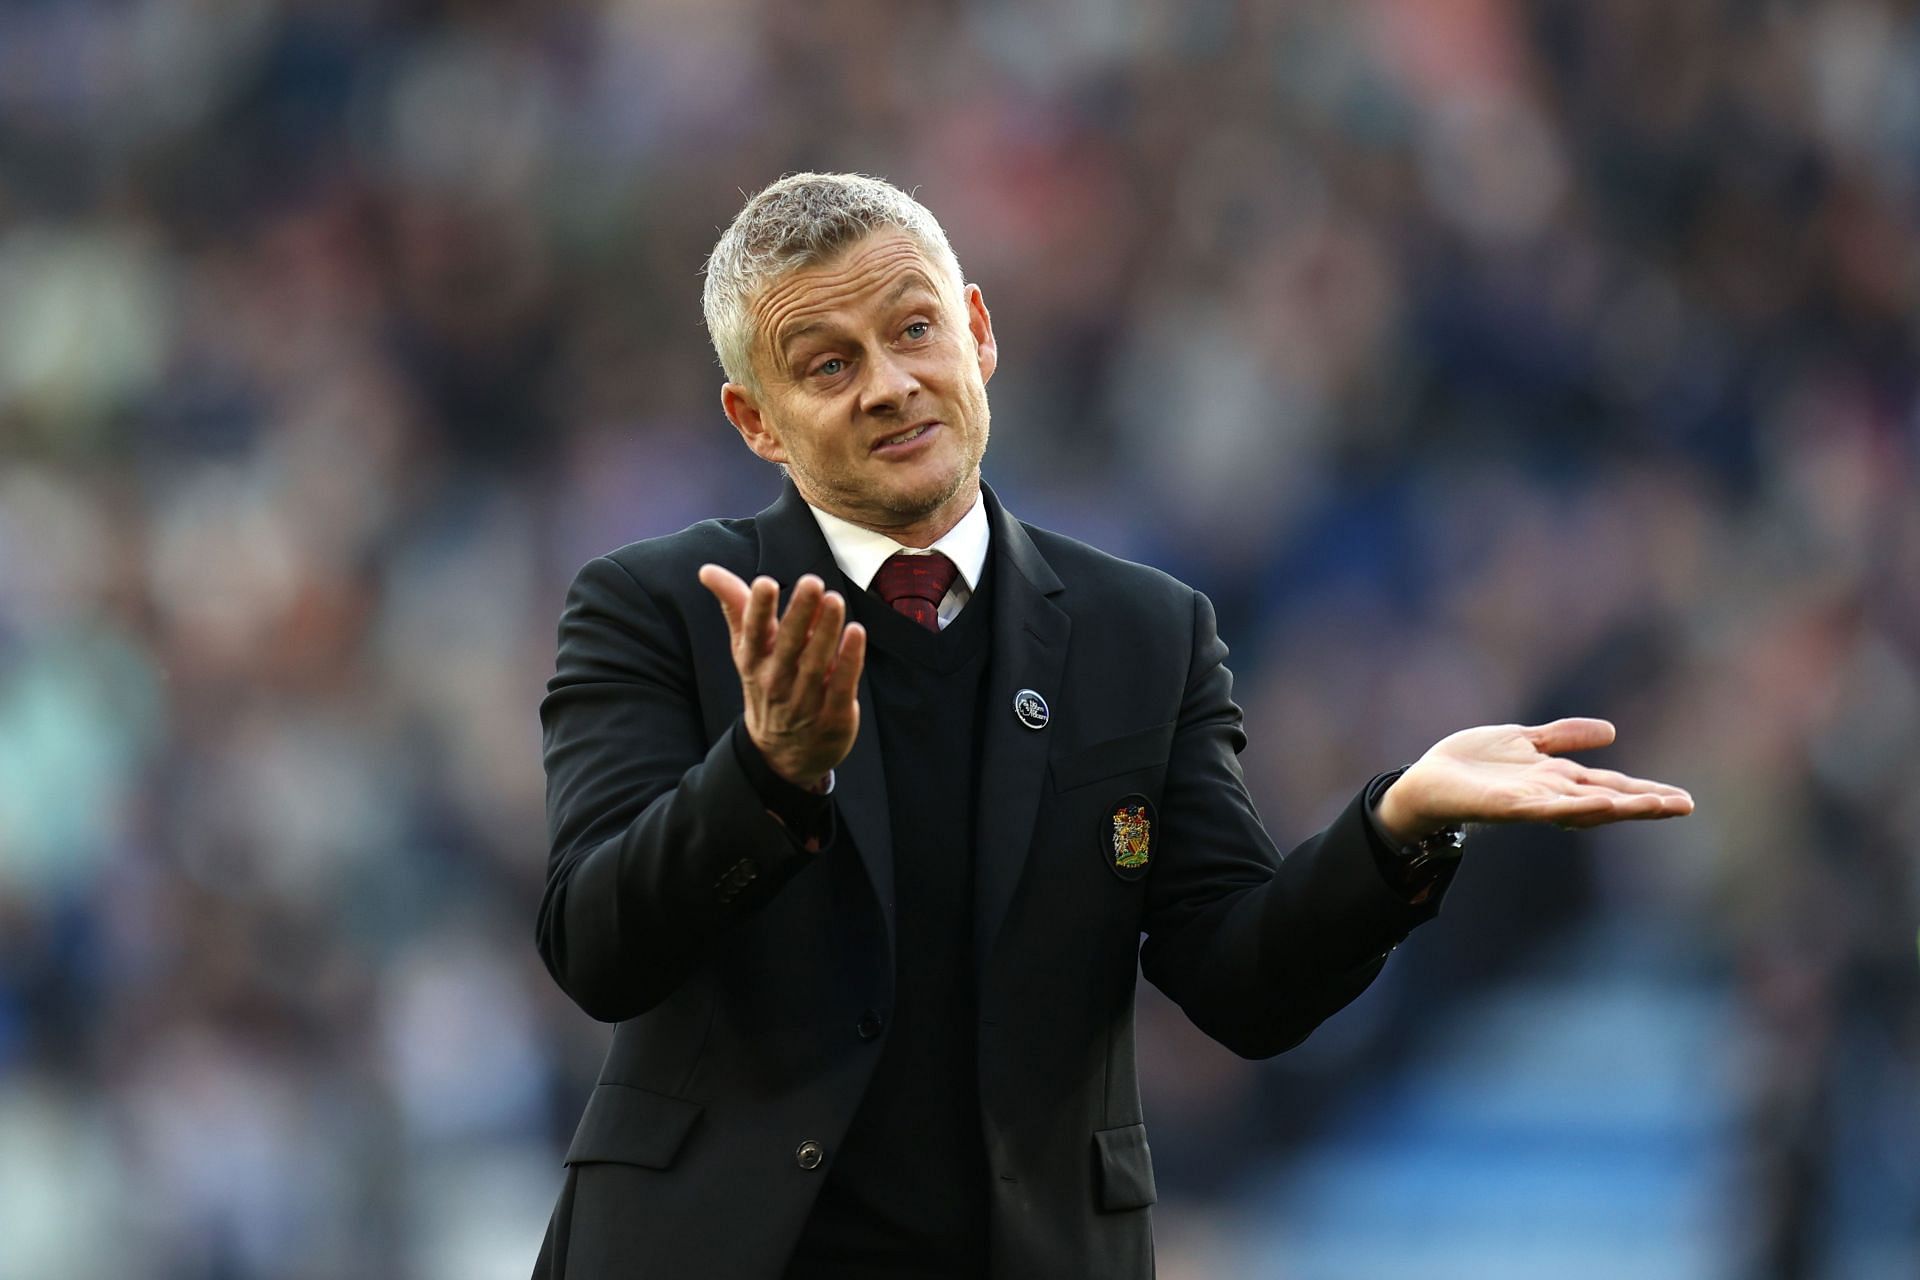 Manchester United makes a decision on Solskjaer&rsquo;s future ahead of the Tottenham clash.